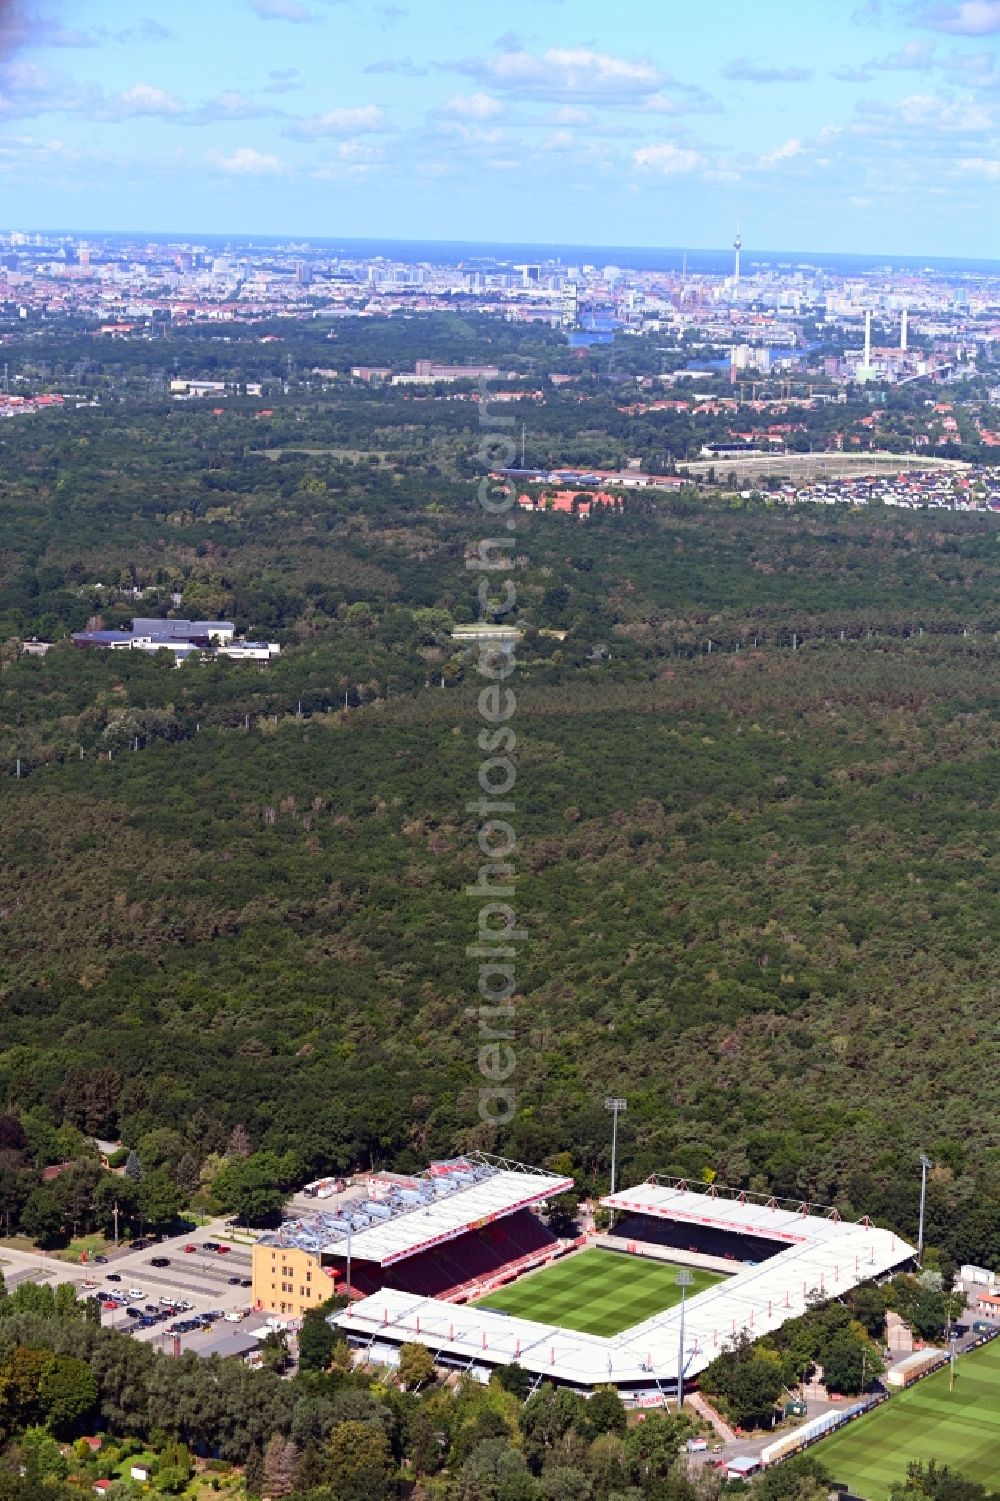 Aerial photograph Berlin - View of the football stadium Alte Foersterei with its new grandstand the district of Koepenick in Berlin. The pitch is homestead for the football games of FC Union Berlin